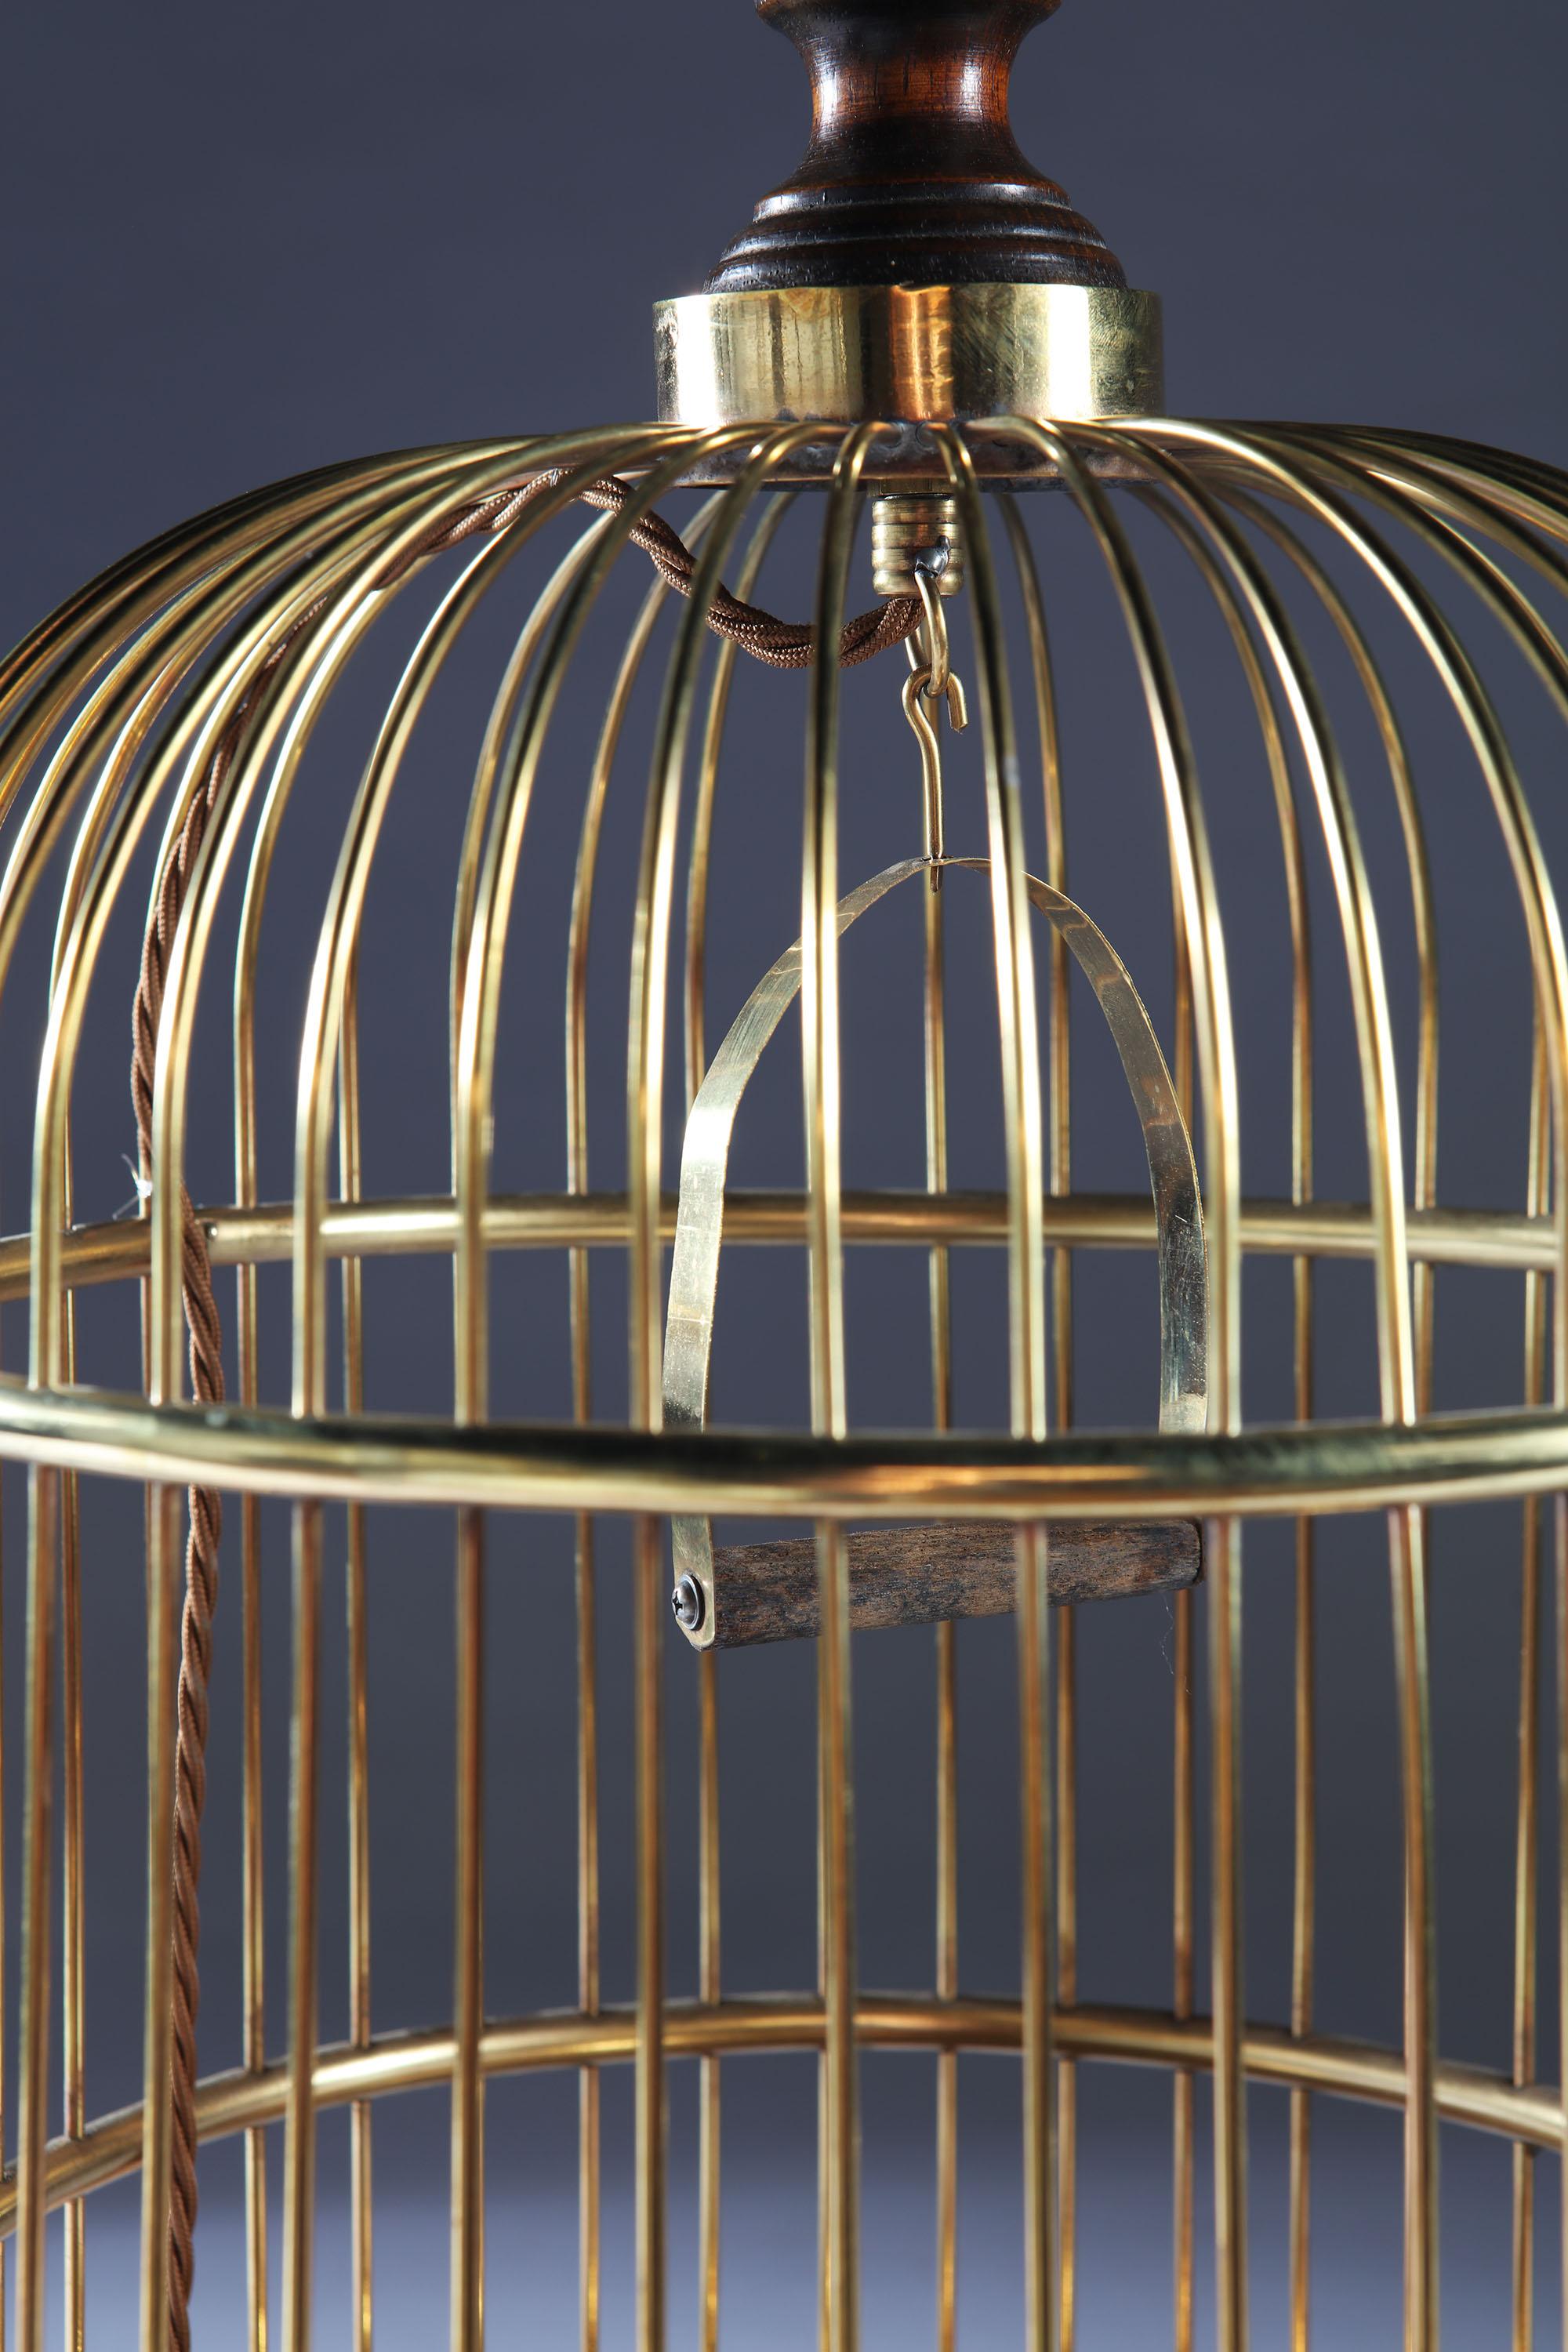 20th Century Edwardian English Brass Metal Birdcage as a Table Lamp, with Mahogany Neck